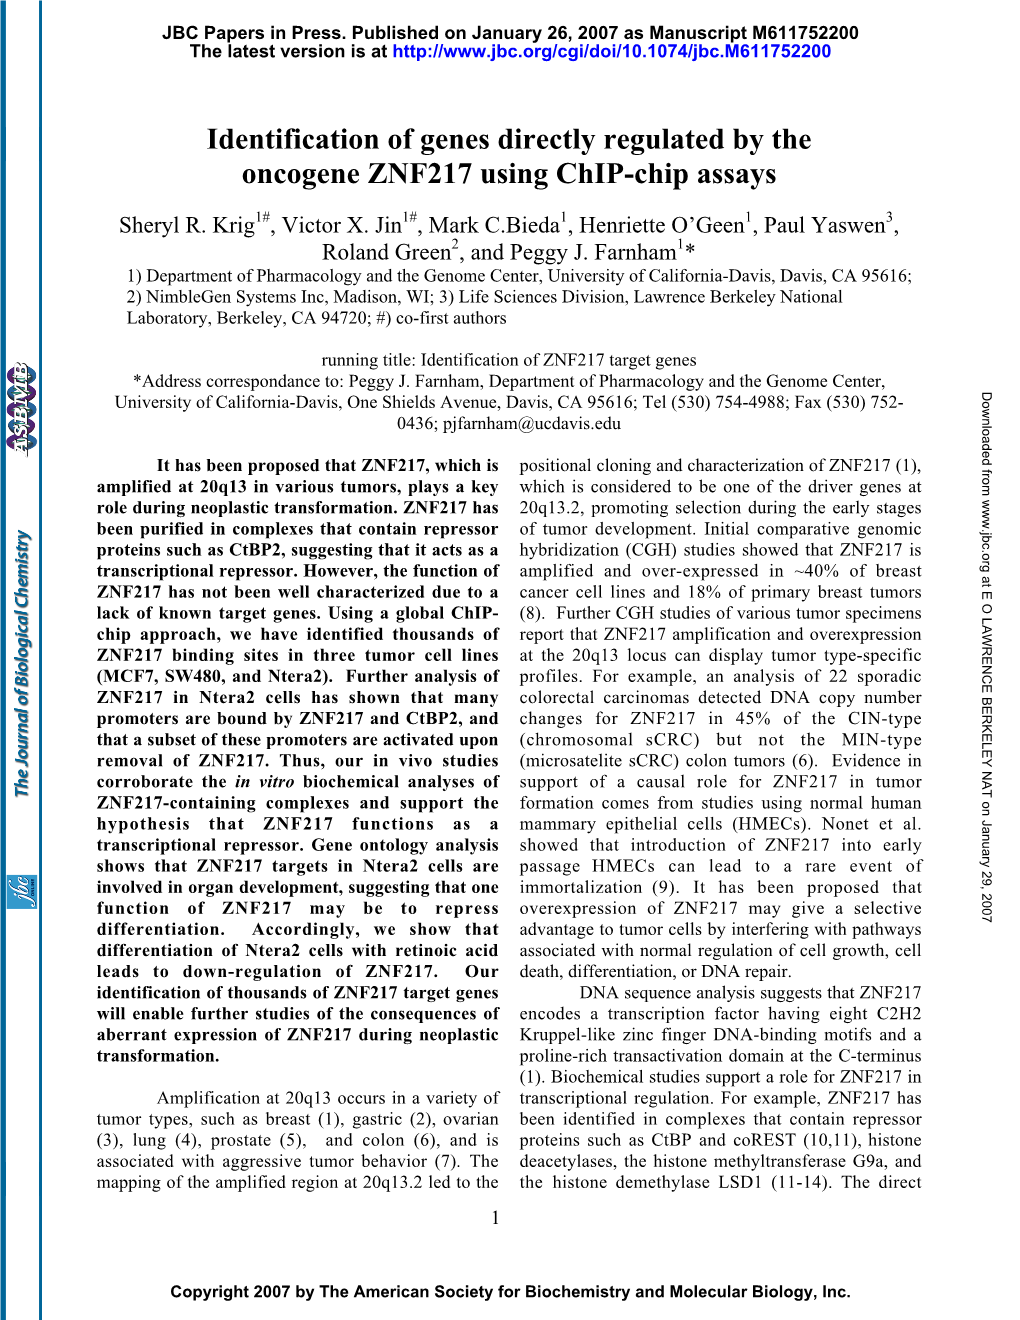 Identification of Genes Directly Regulated by the Oncogene ZNF217 Using Chip-Chip Assays